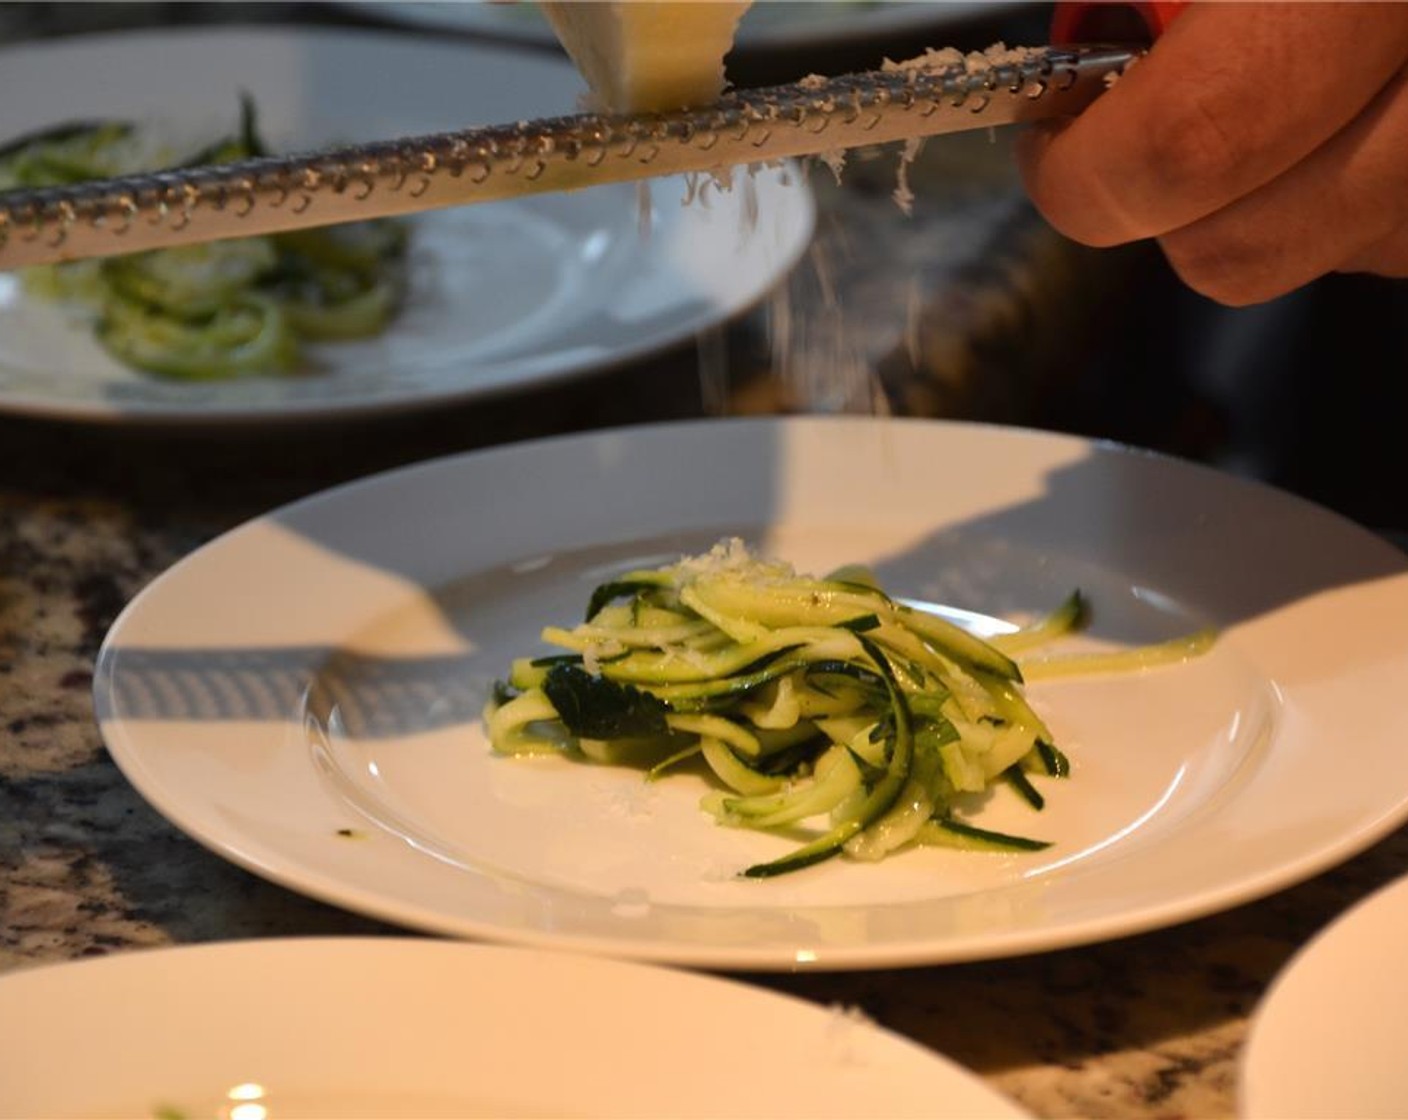 step 5 Transfer salad to serving dishes and top with remaining pecorino cheese. Serve immediately and enjoy!